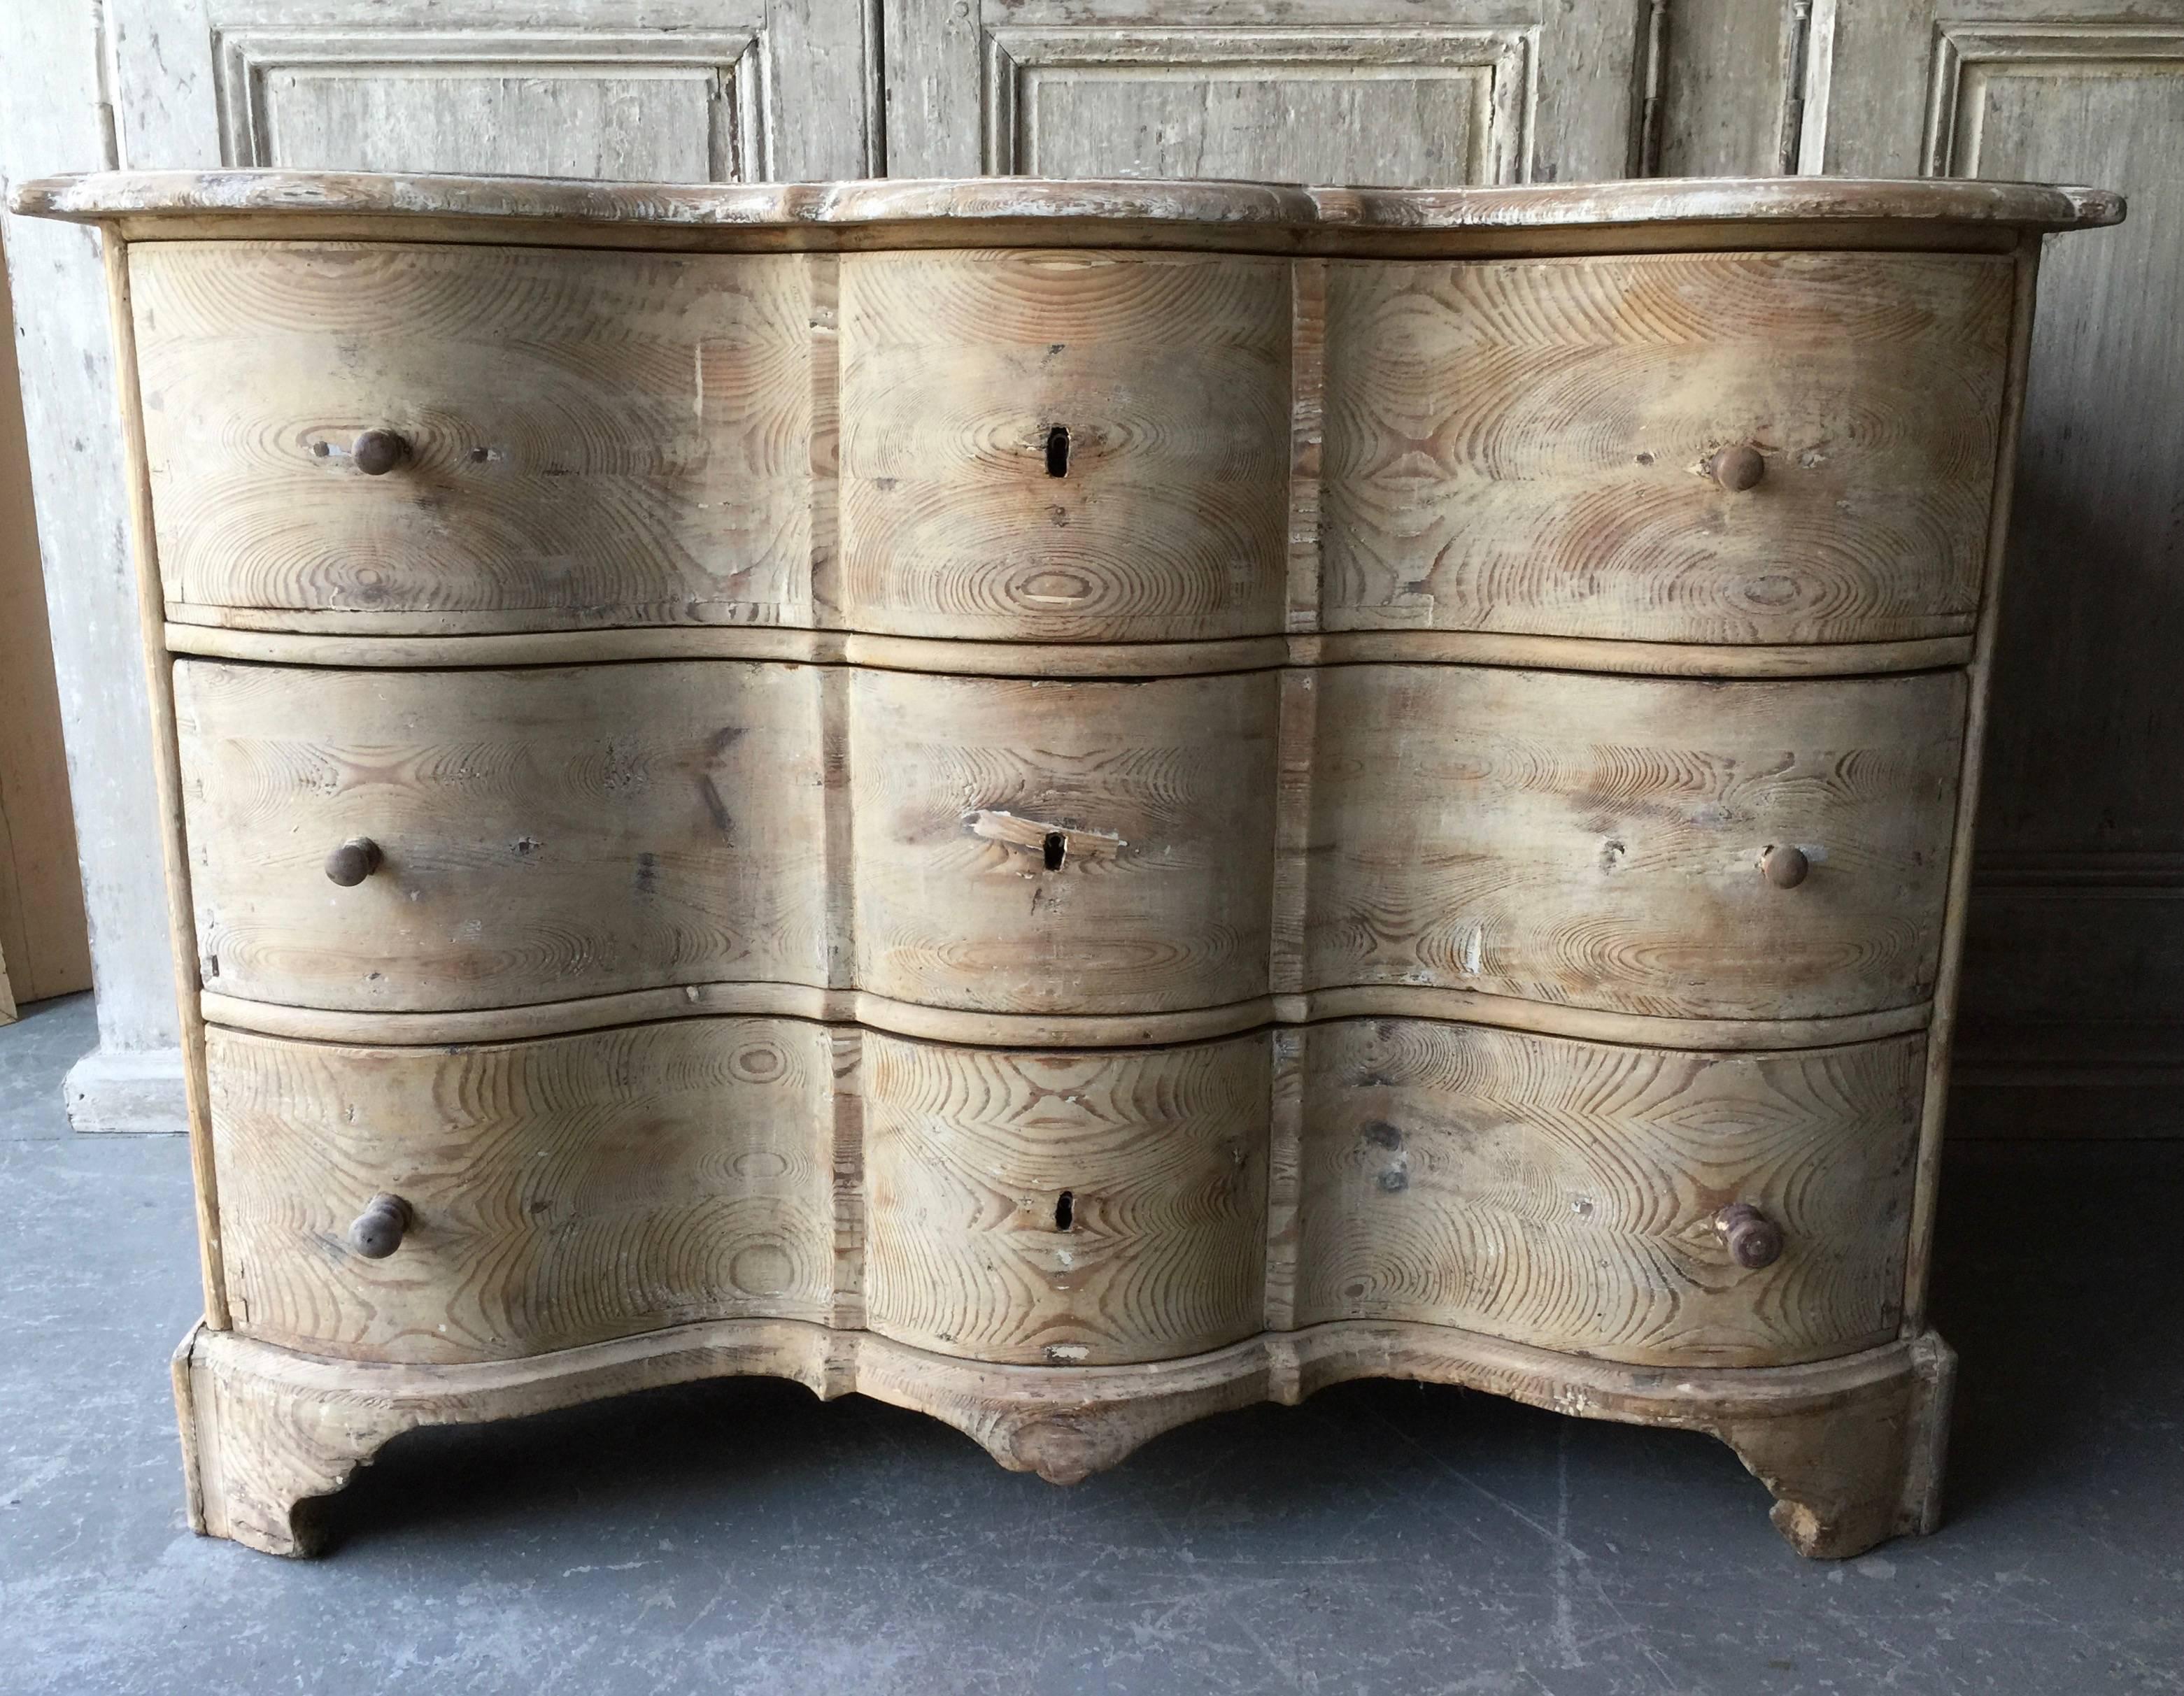 Incredible 18th century Swedish late Baroque chest of drawers with wonderfully carved serpentine fronted drawess,
Sweden, 18th century.
Surprising pieces and objects, authentic, decorative and rare items. Discover them all.